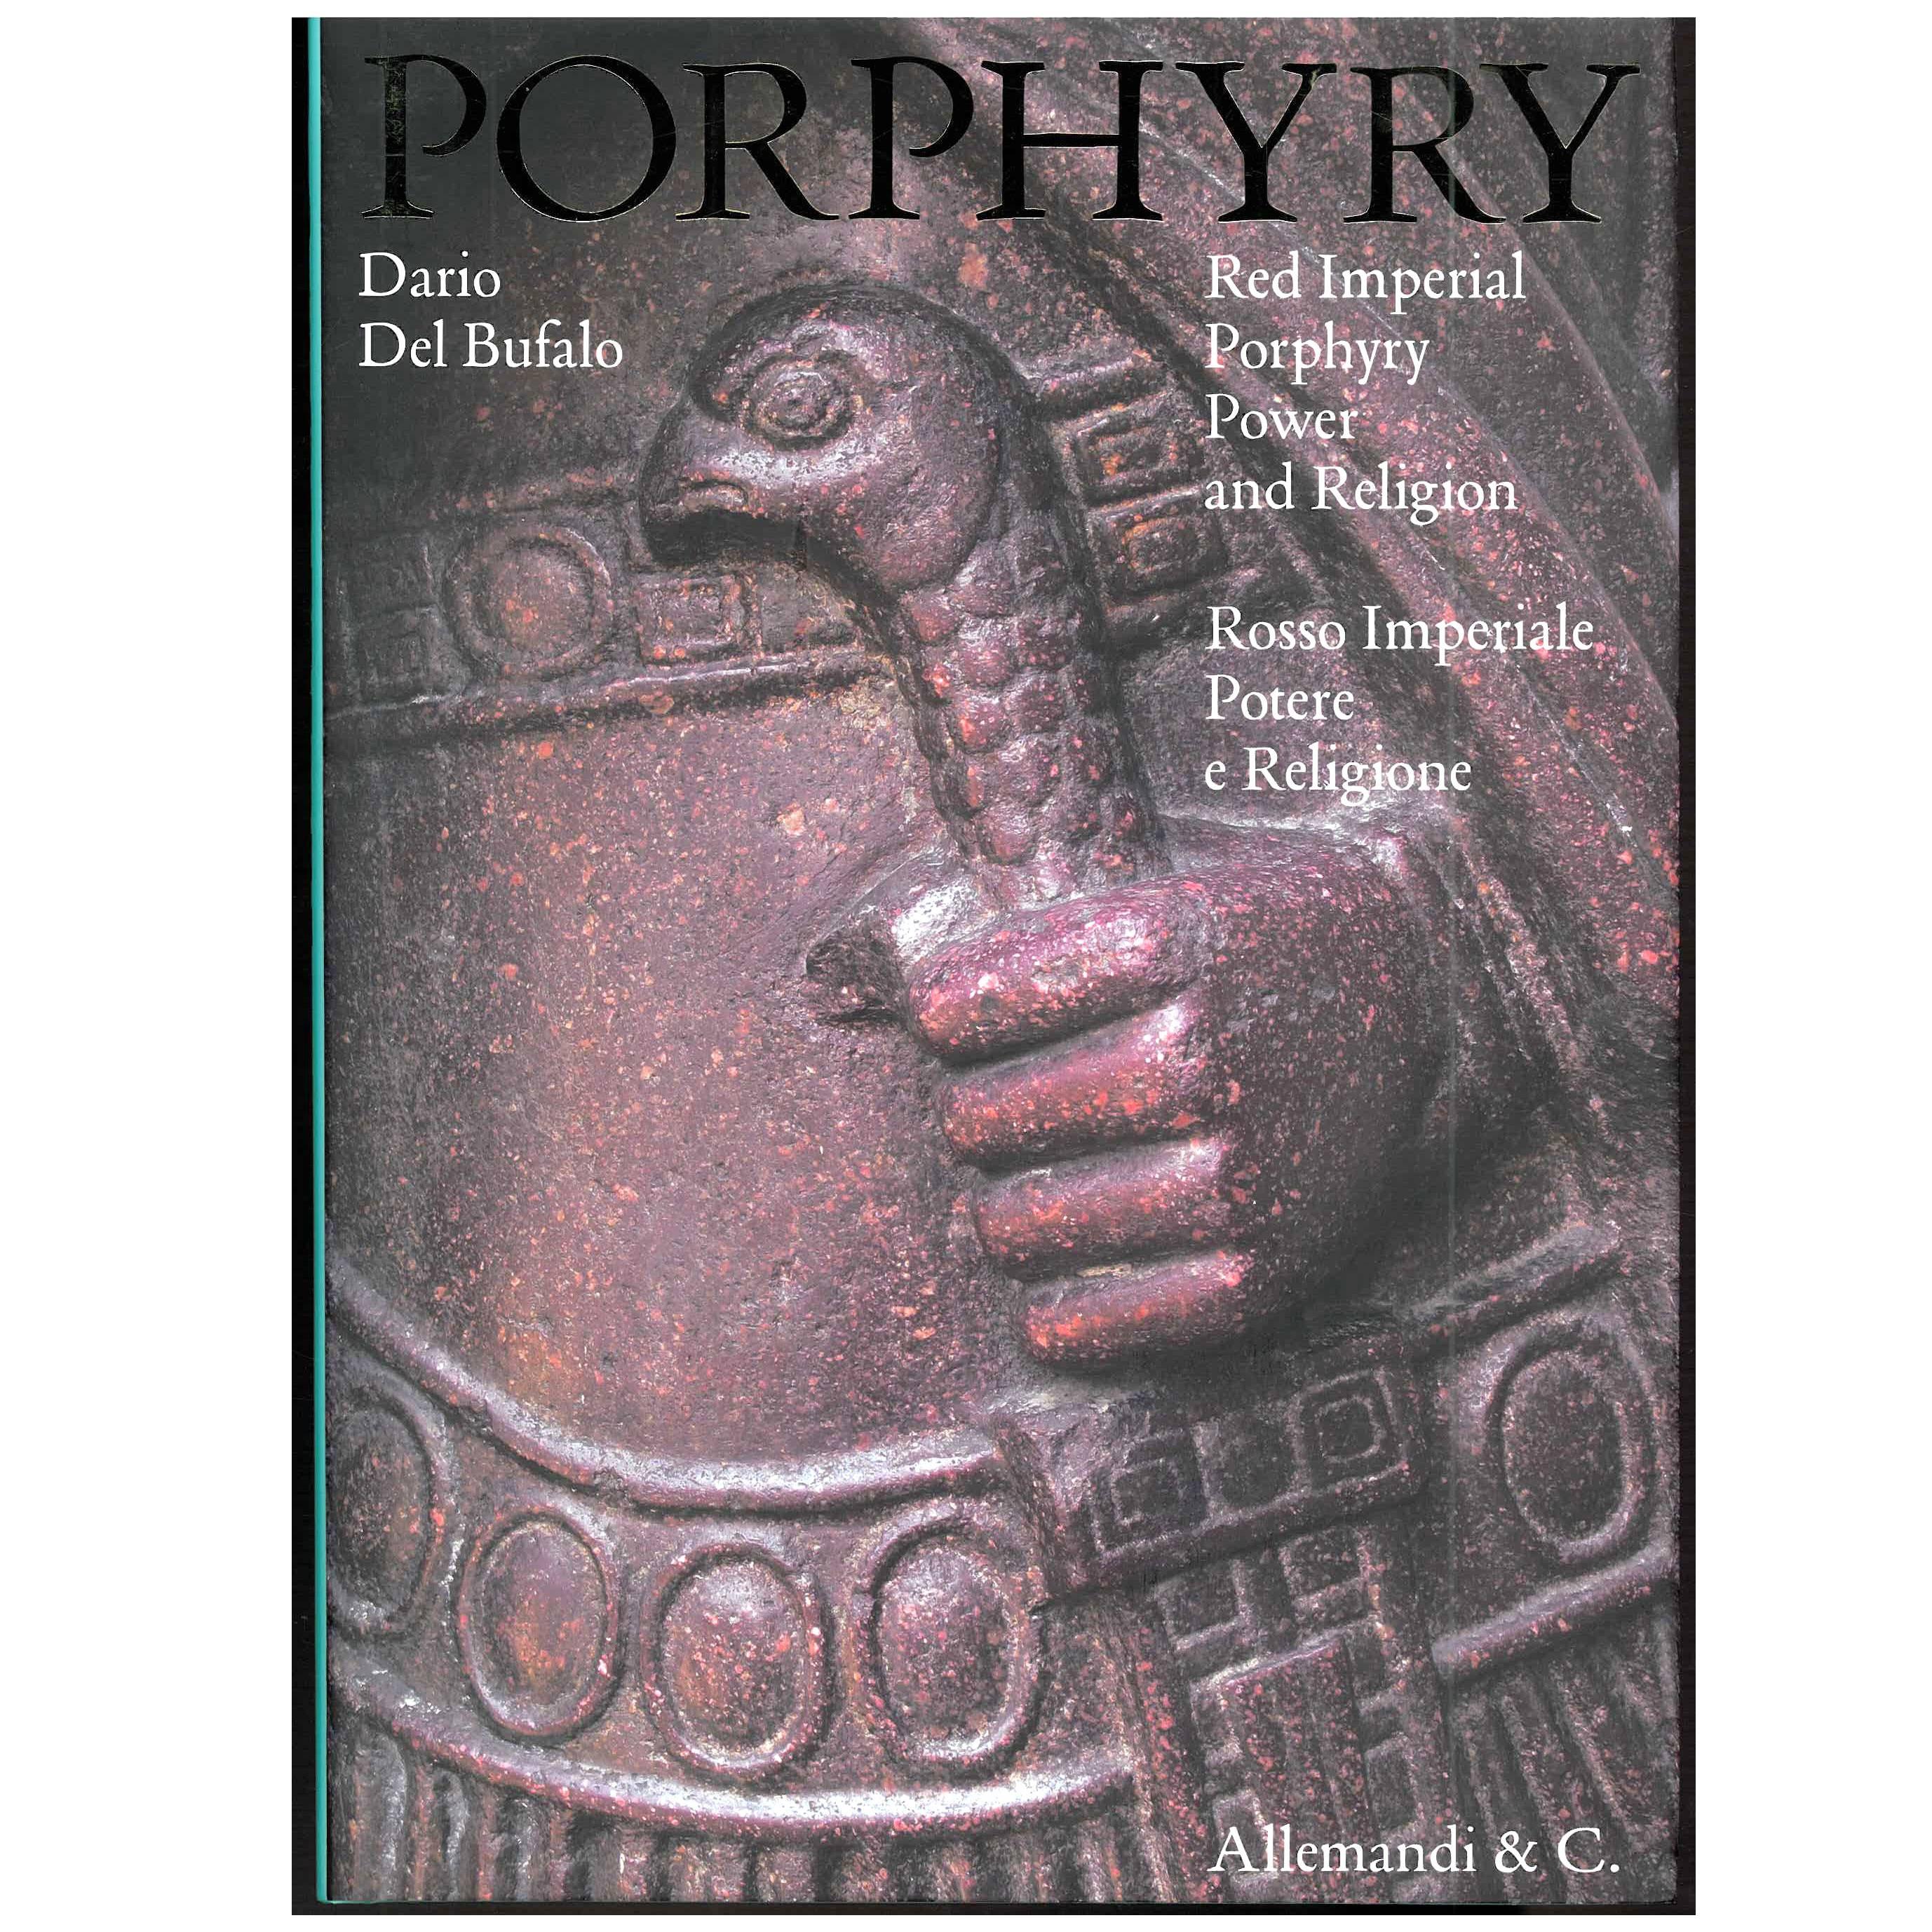 Porphyry: Red Imperial Porphyry Power and Religion (Book)